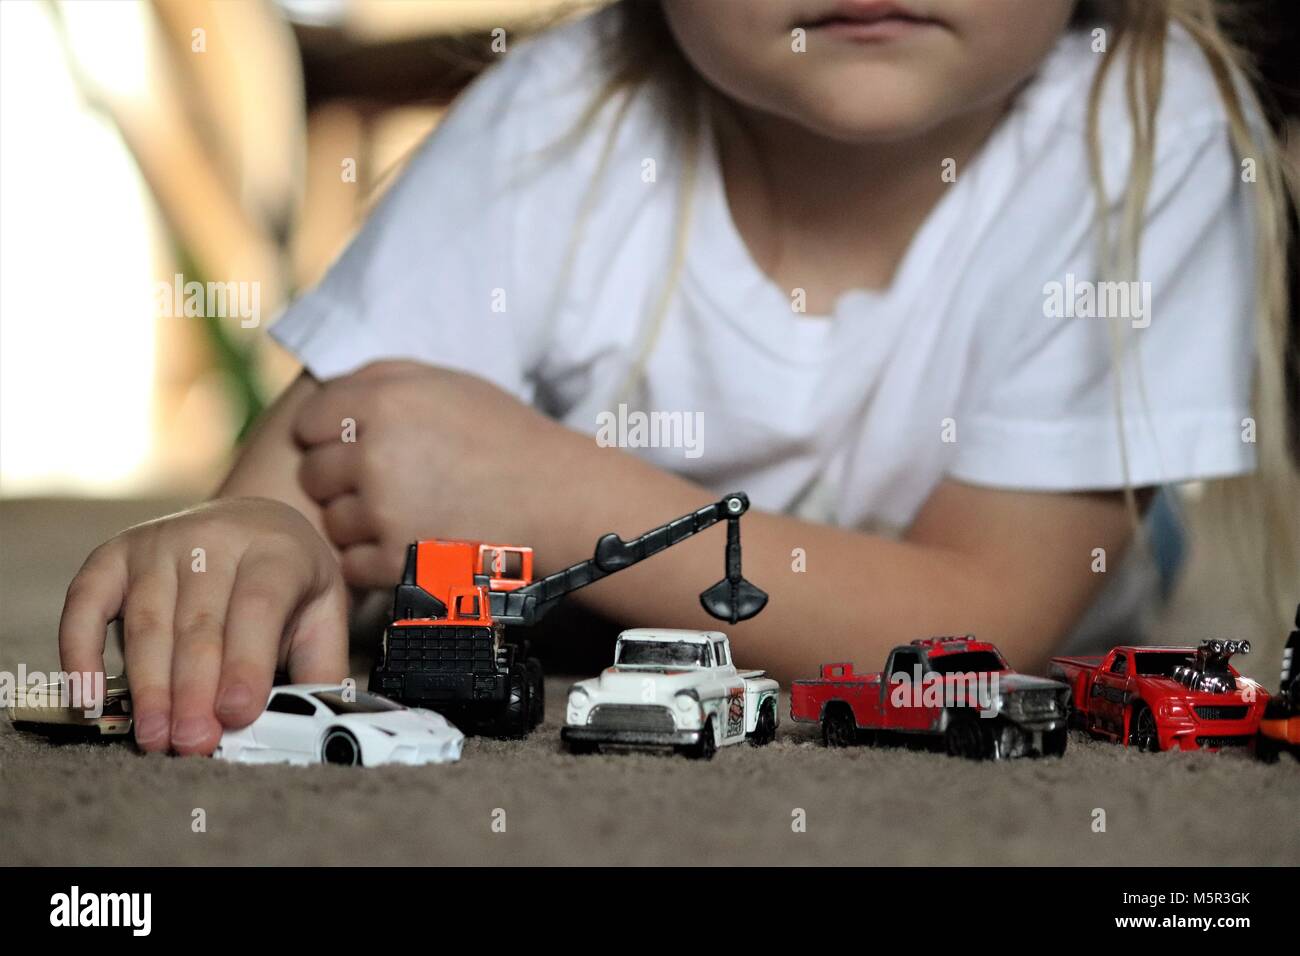 Girl enjoys playing with her toy cars Stock Photo